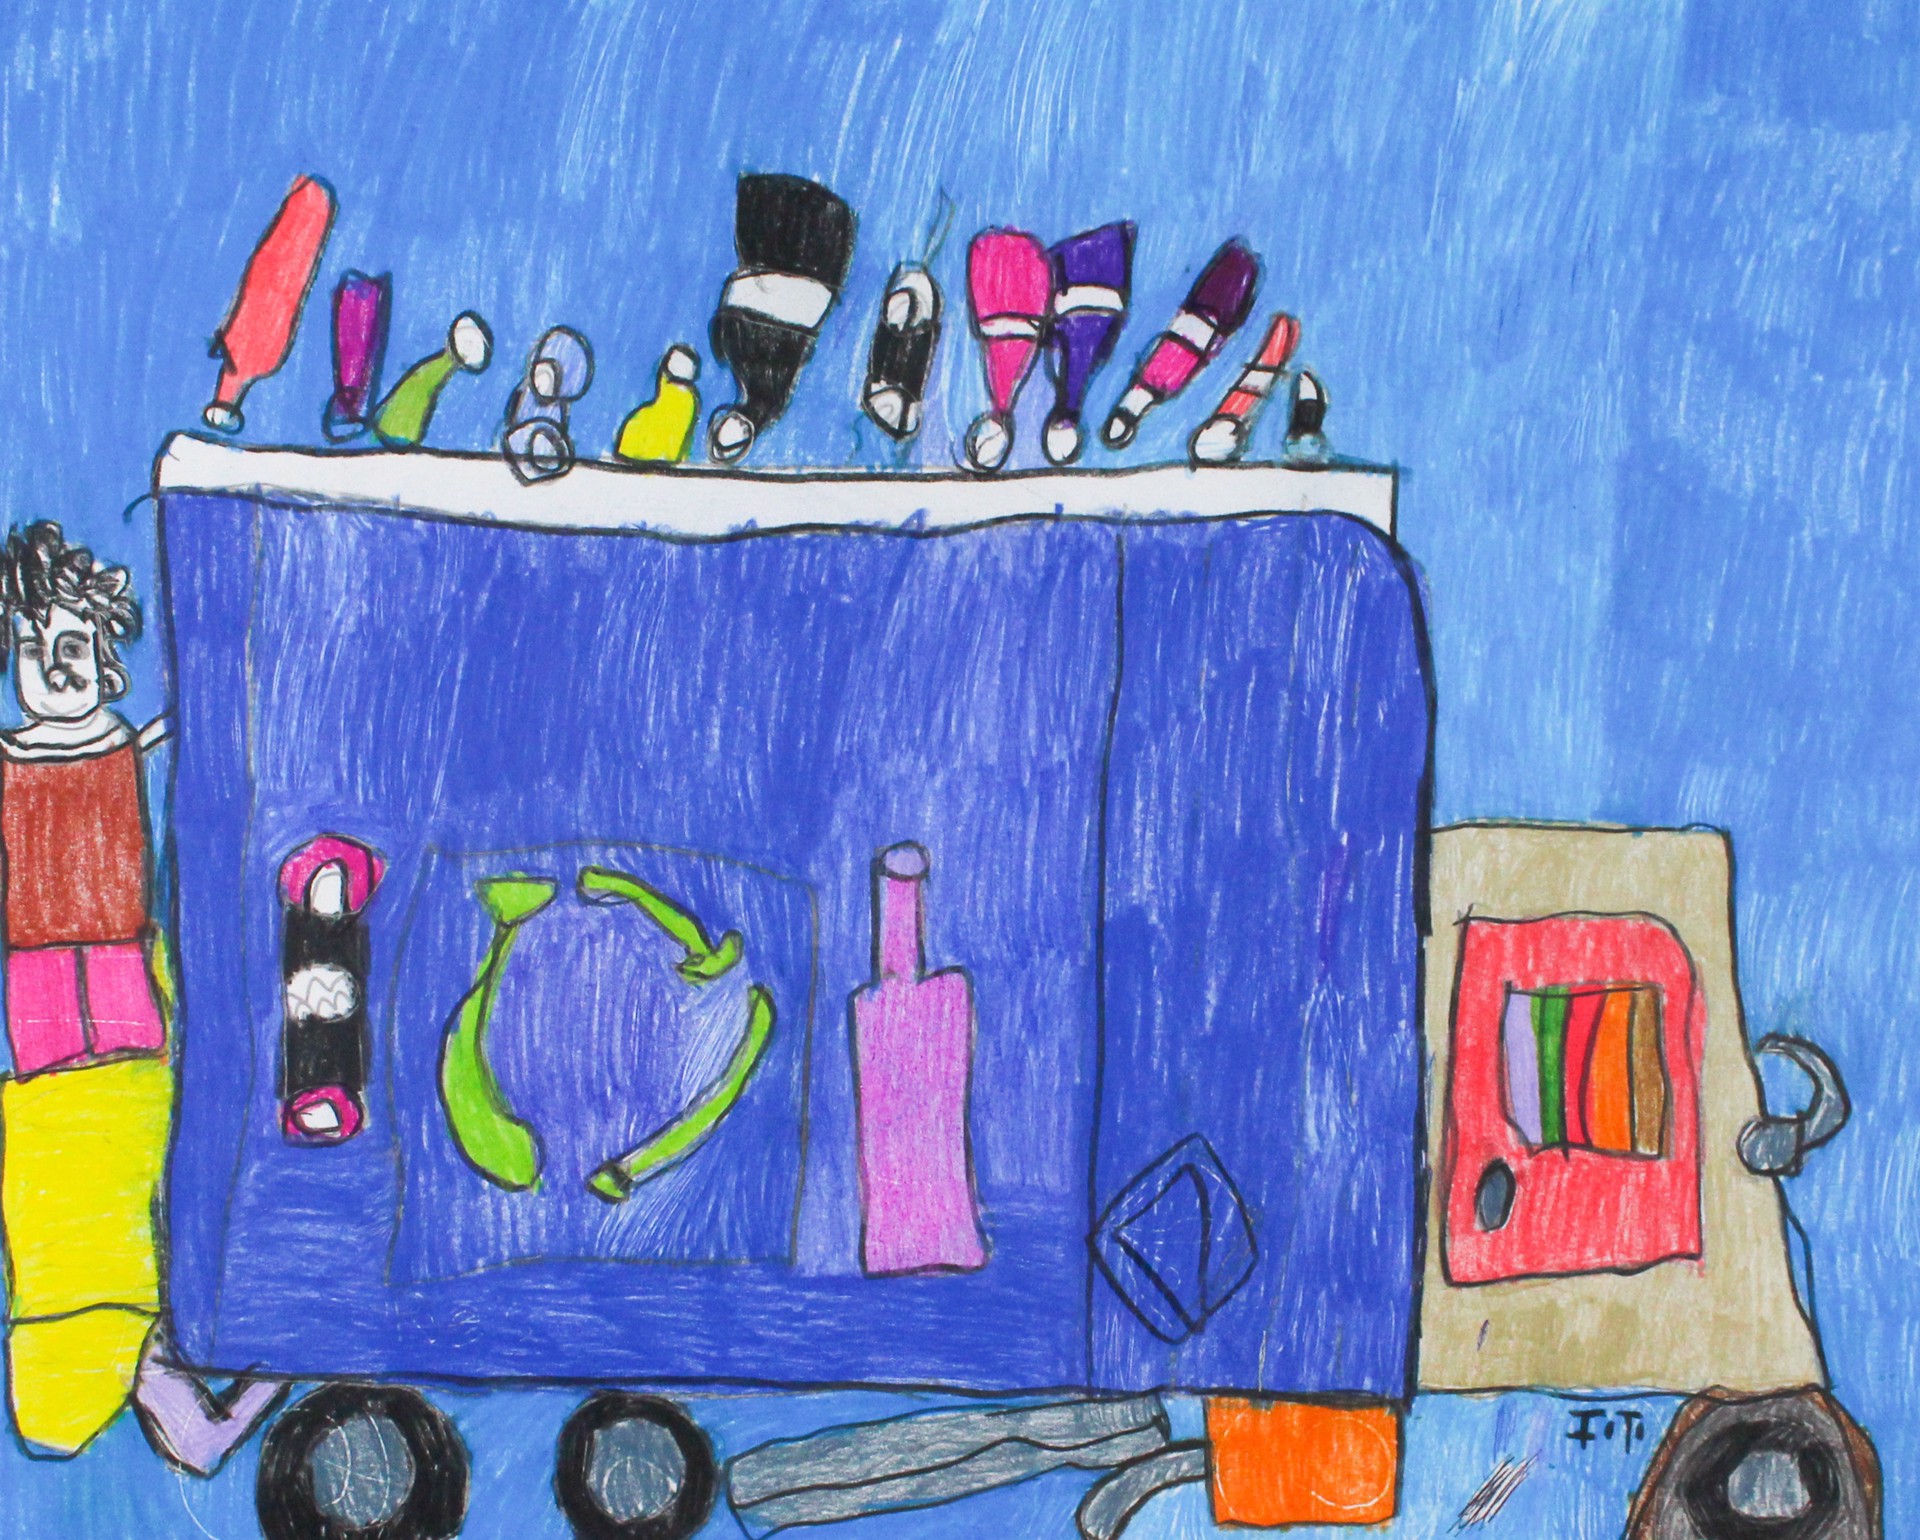 Recycle Truck by Imani Turner